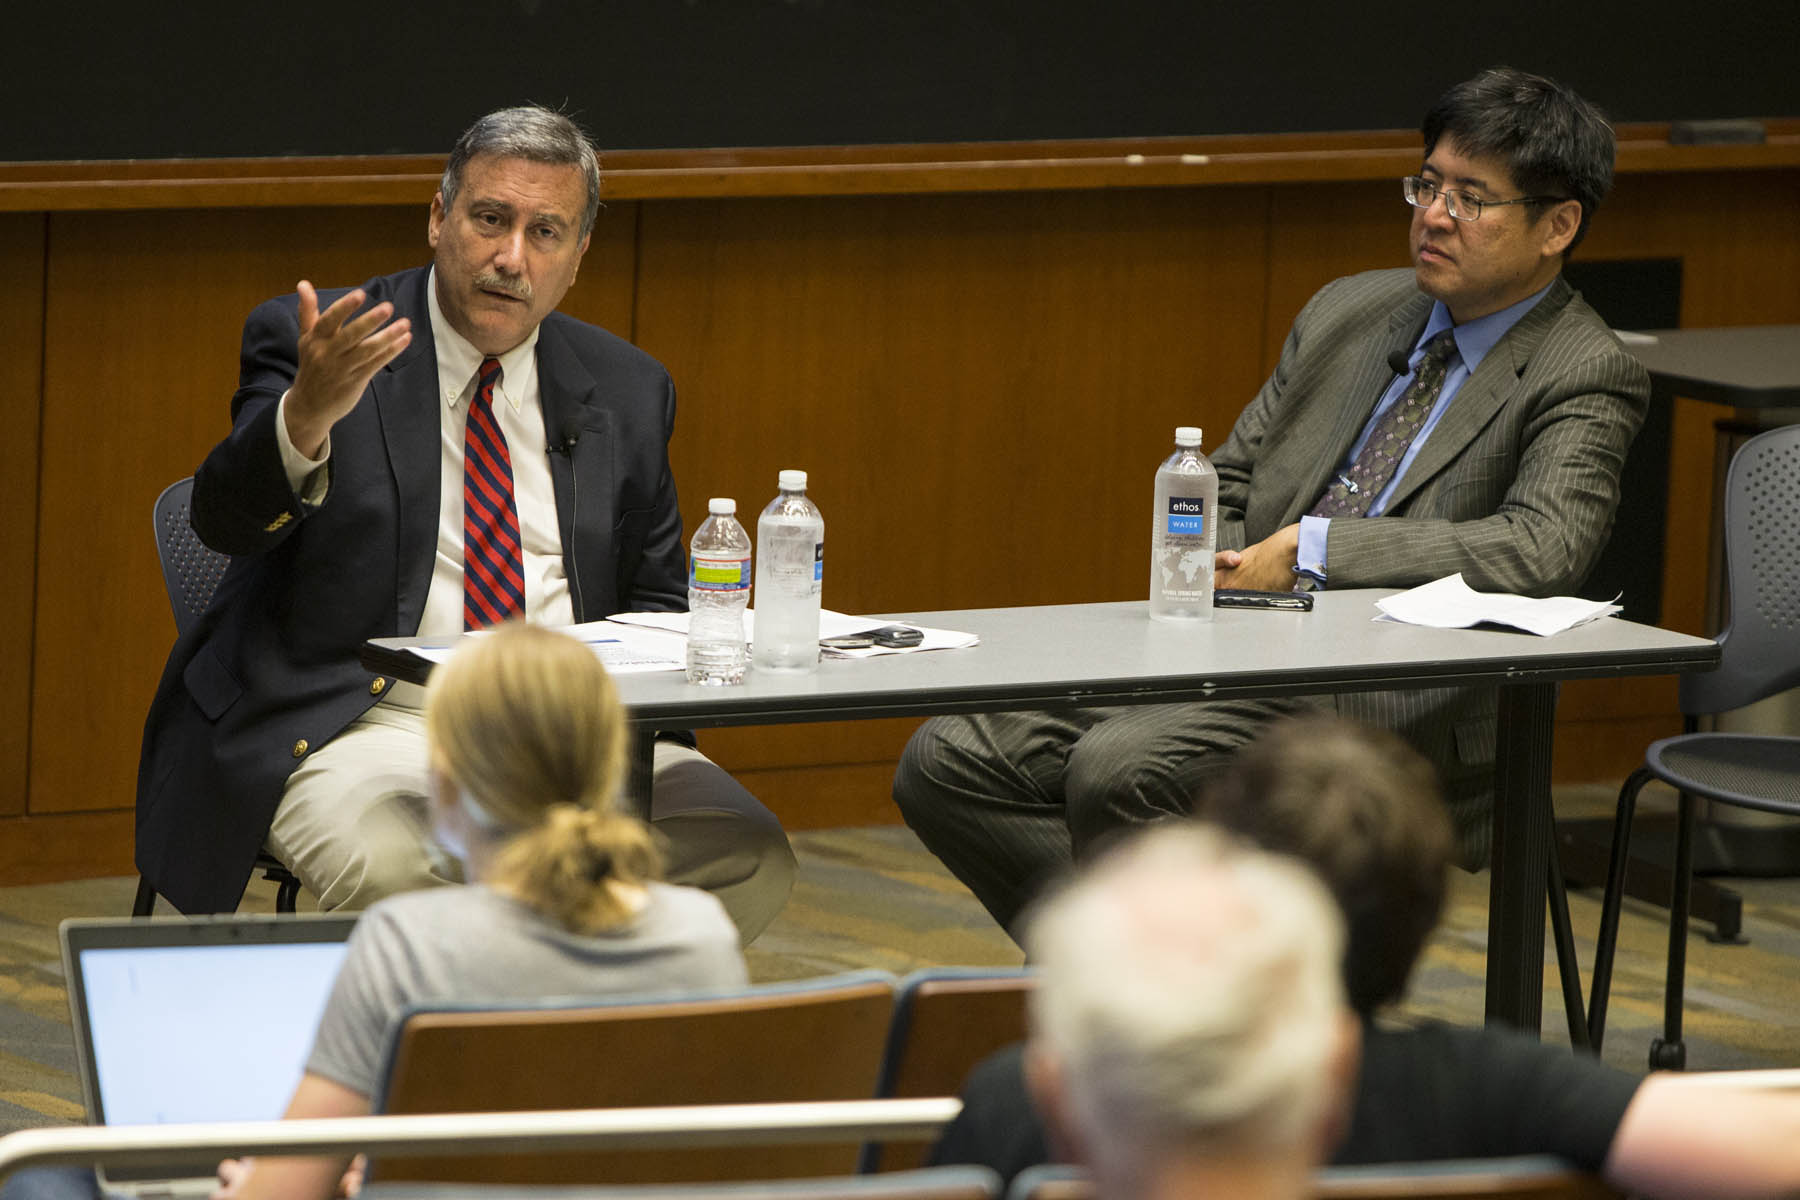  Larry Sabato, left, and Sam Wang, right, talk to a crowd